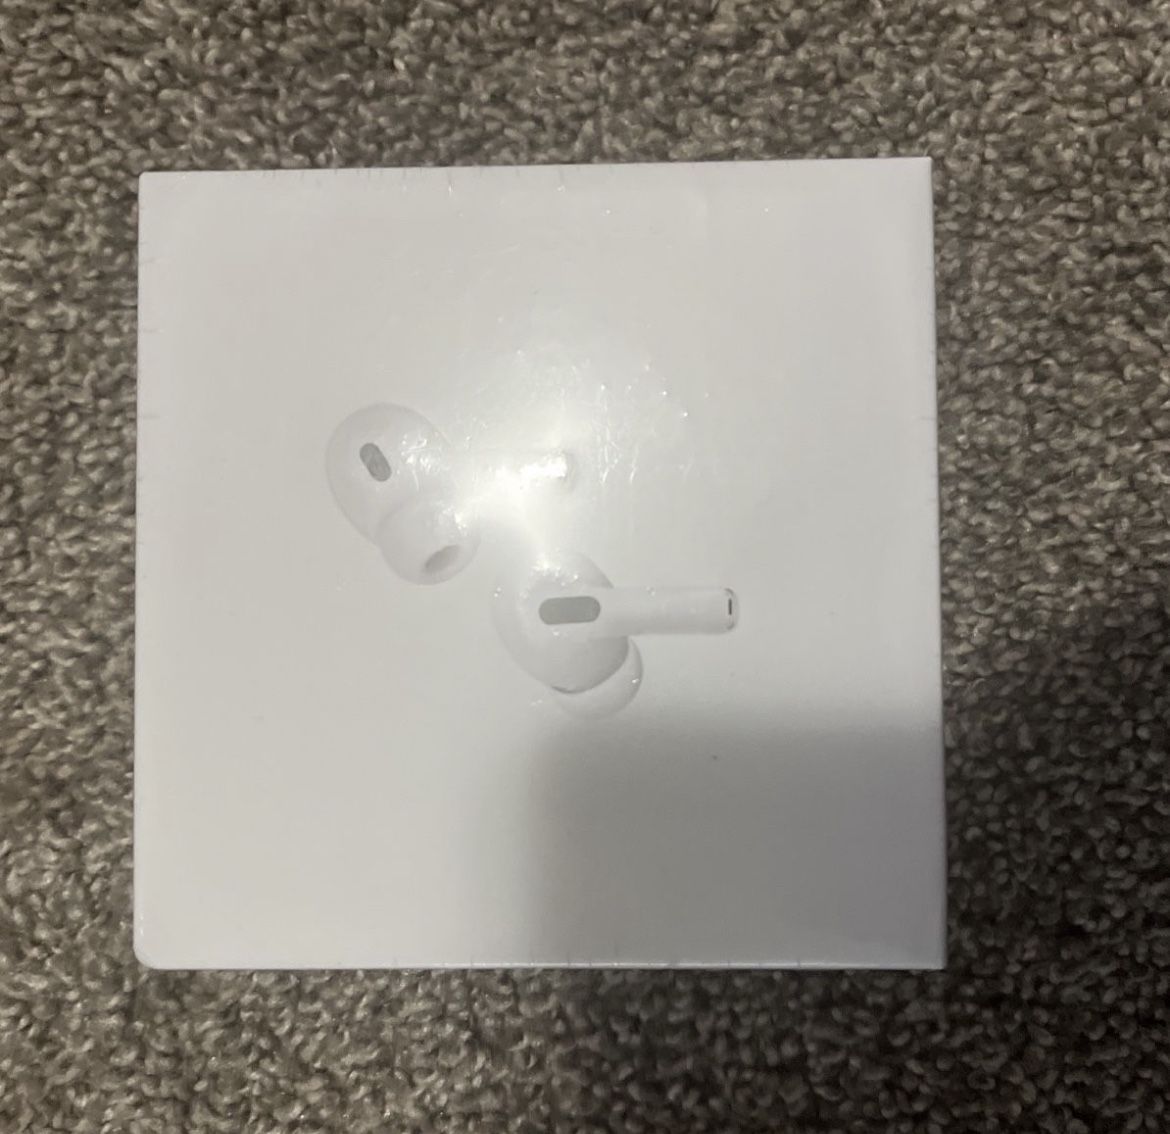 Almost New AirPod Pros